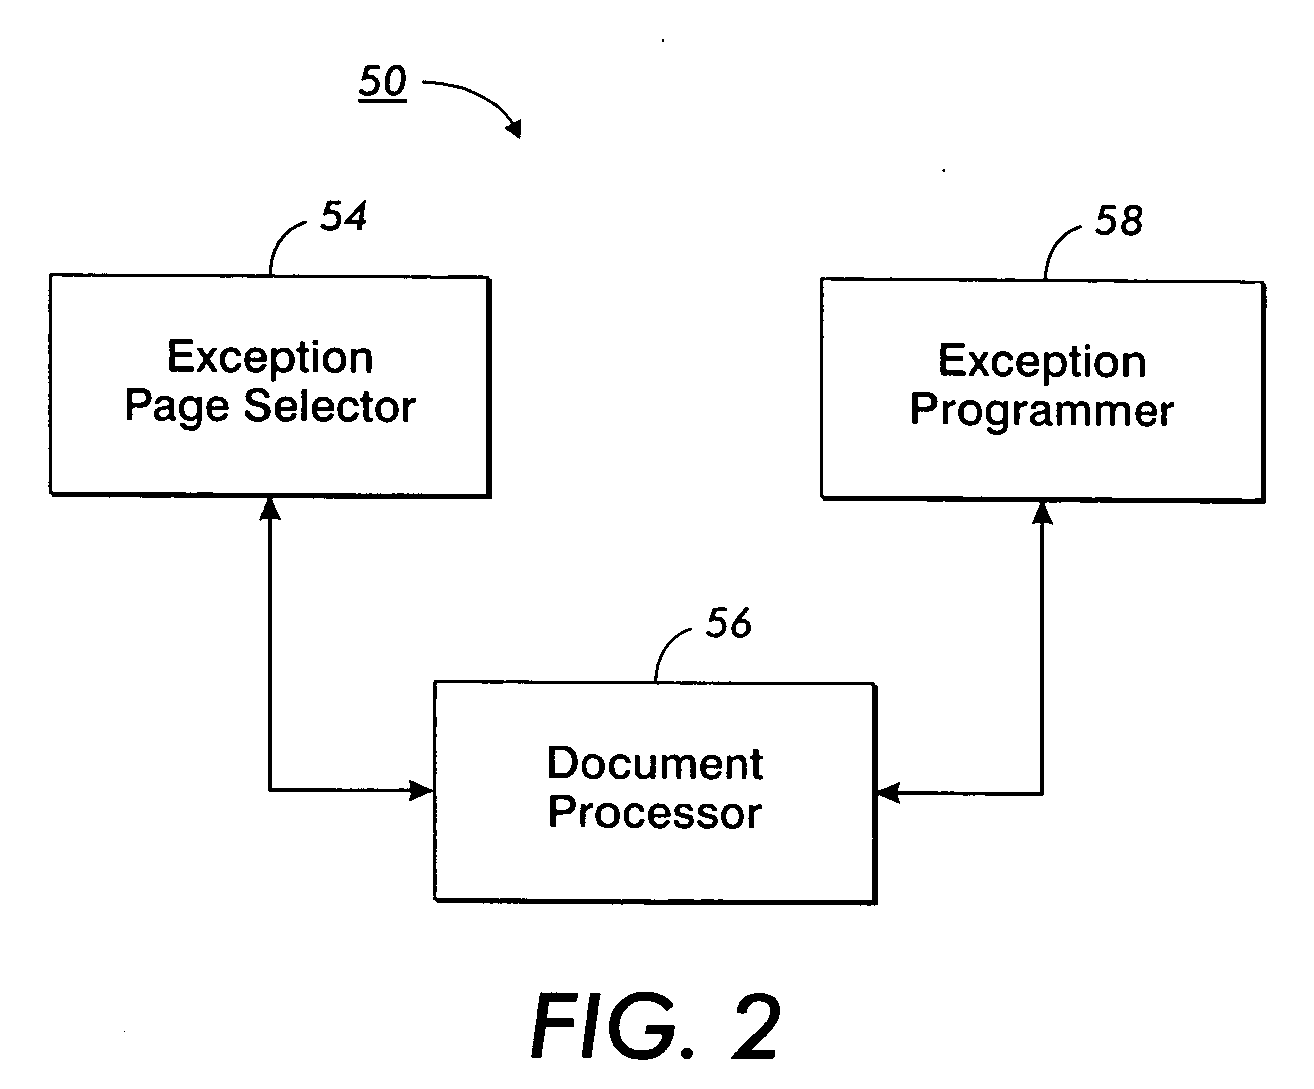 Method and system for multi-page exception programming in a document management system